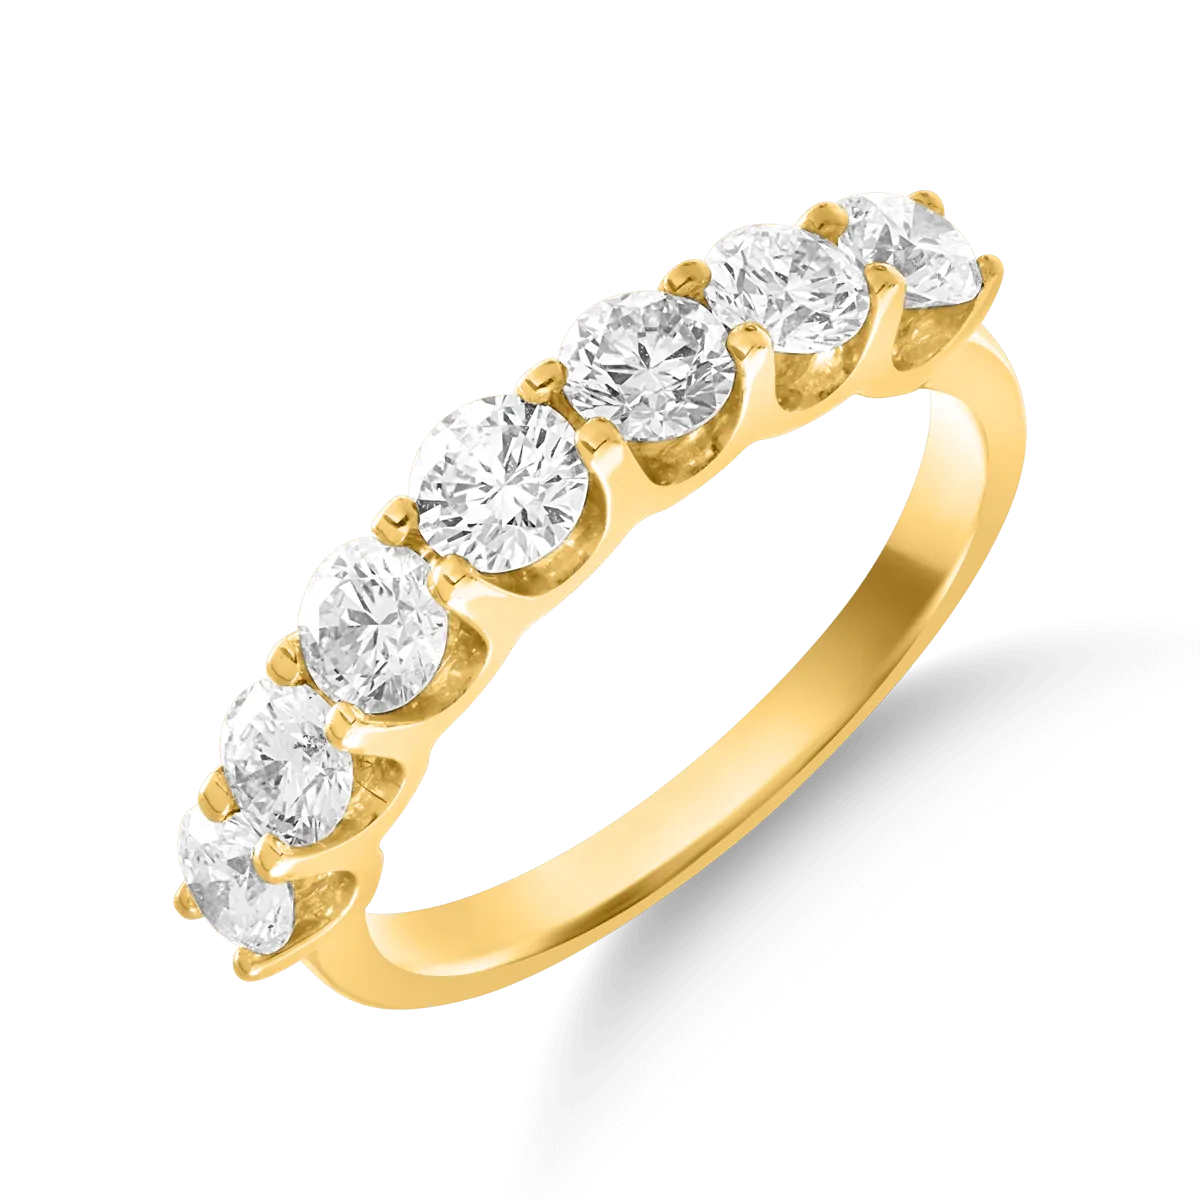 14K yellow gold ring with 1ct diamonds